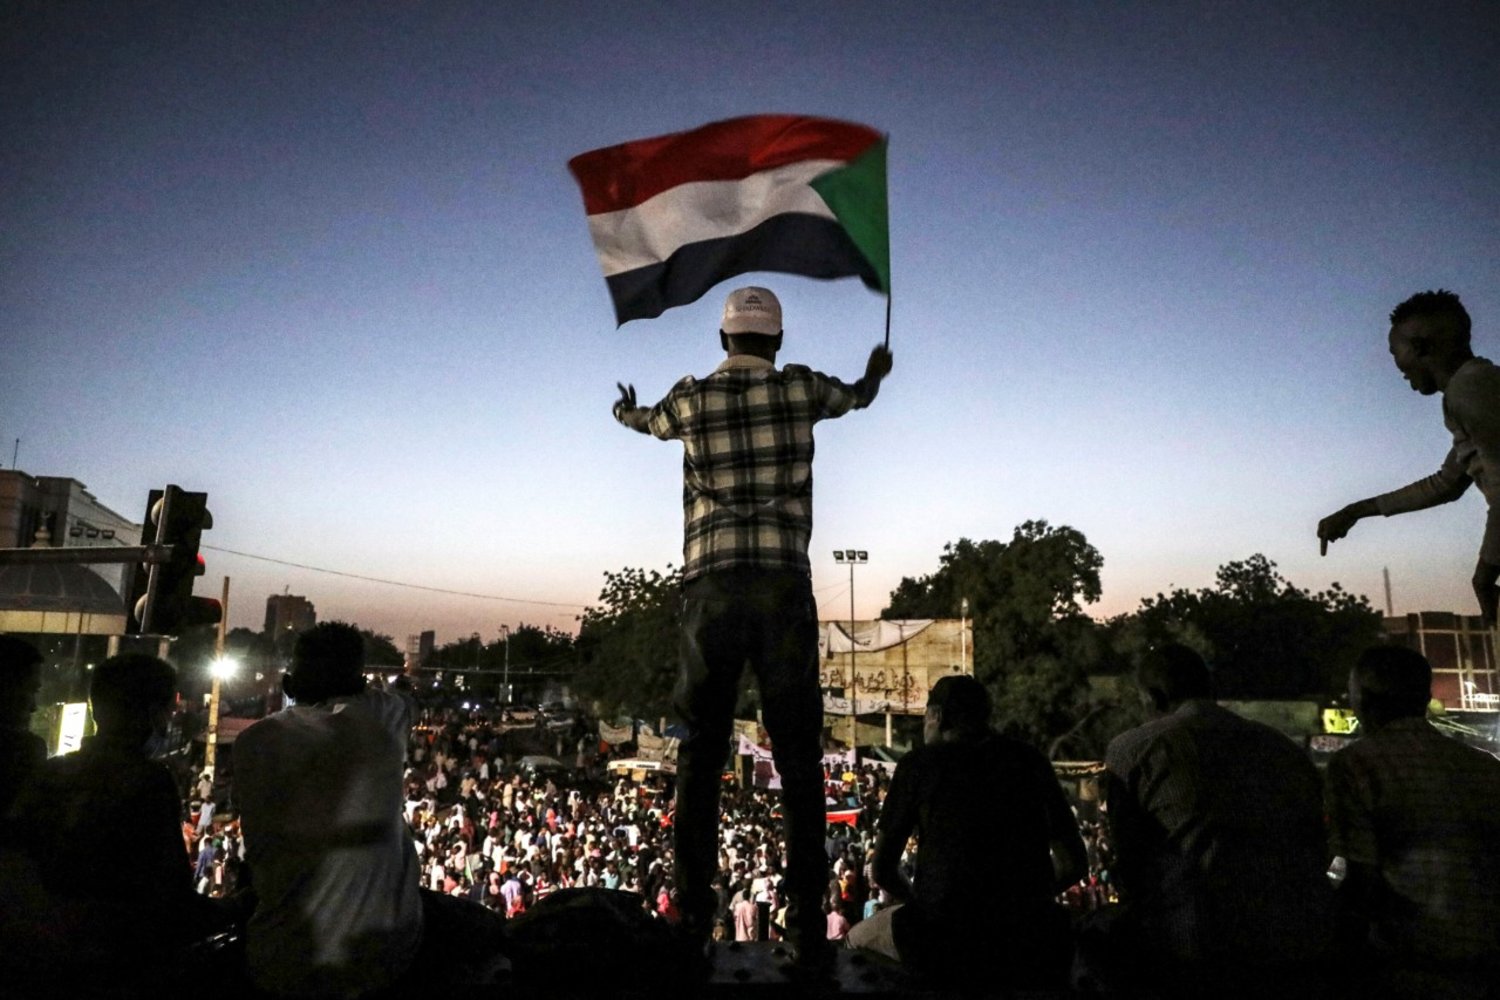 Sudanese protesters chant slogans during a rally outside the army headquarters in Sudan's capital Khartoum on Saturday, April 20, 2019. (AP)